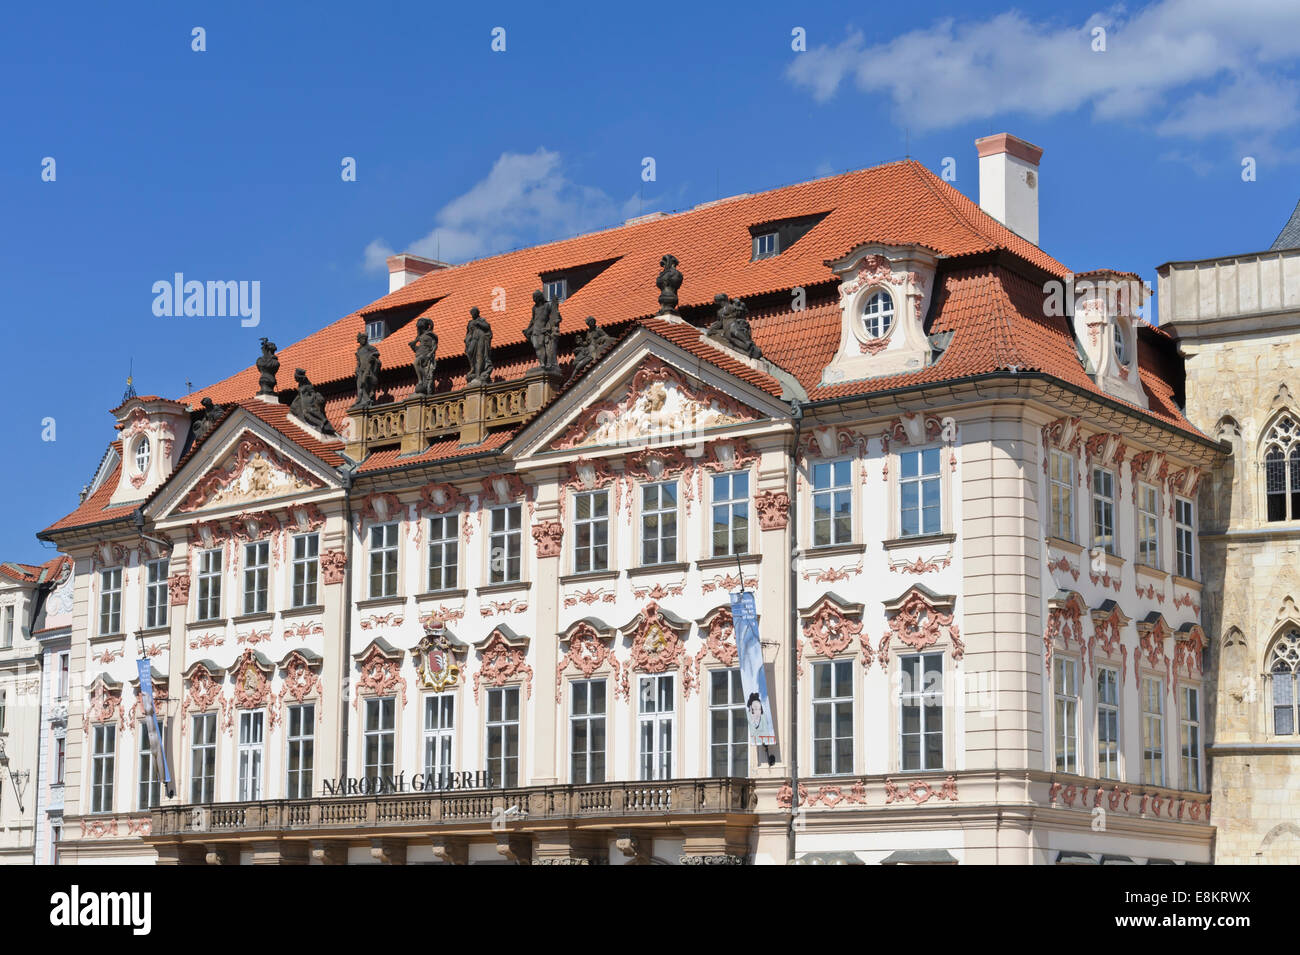 The National Gallery with statues and decorative designs on the facade of the building in the Old Town Square, Prague. Stock Photo